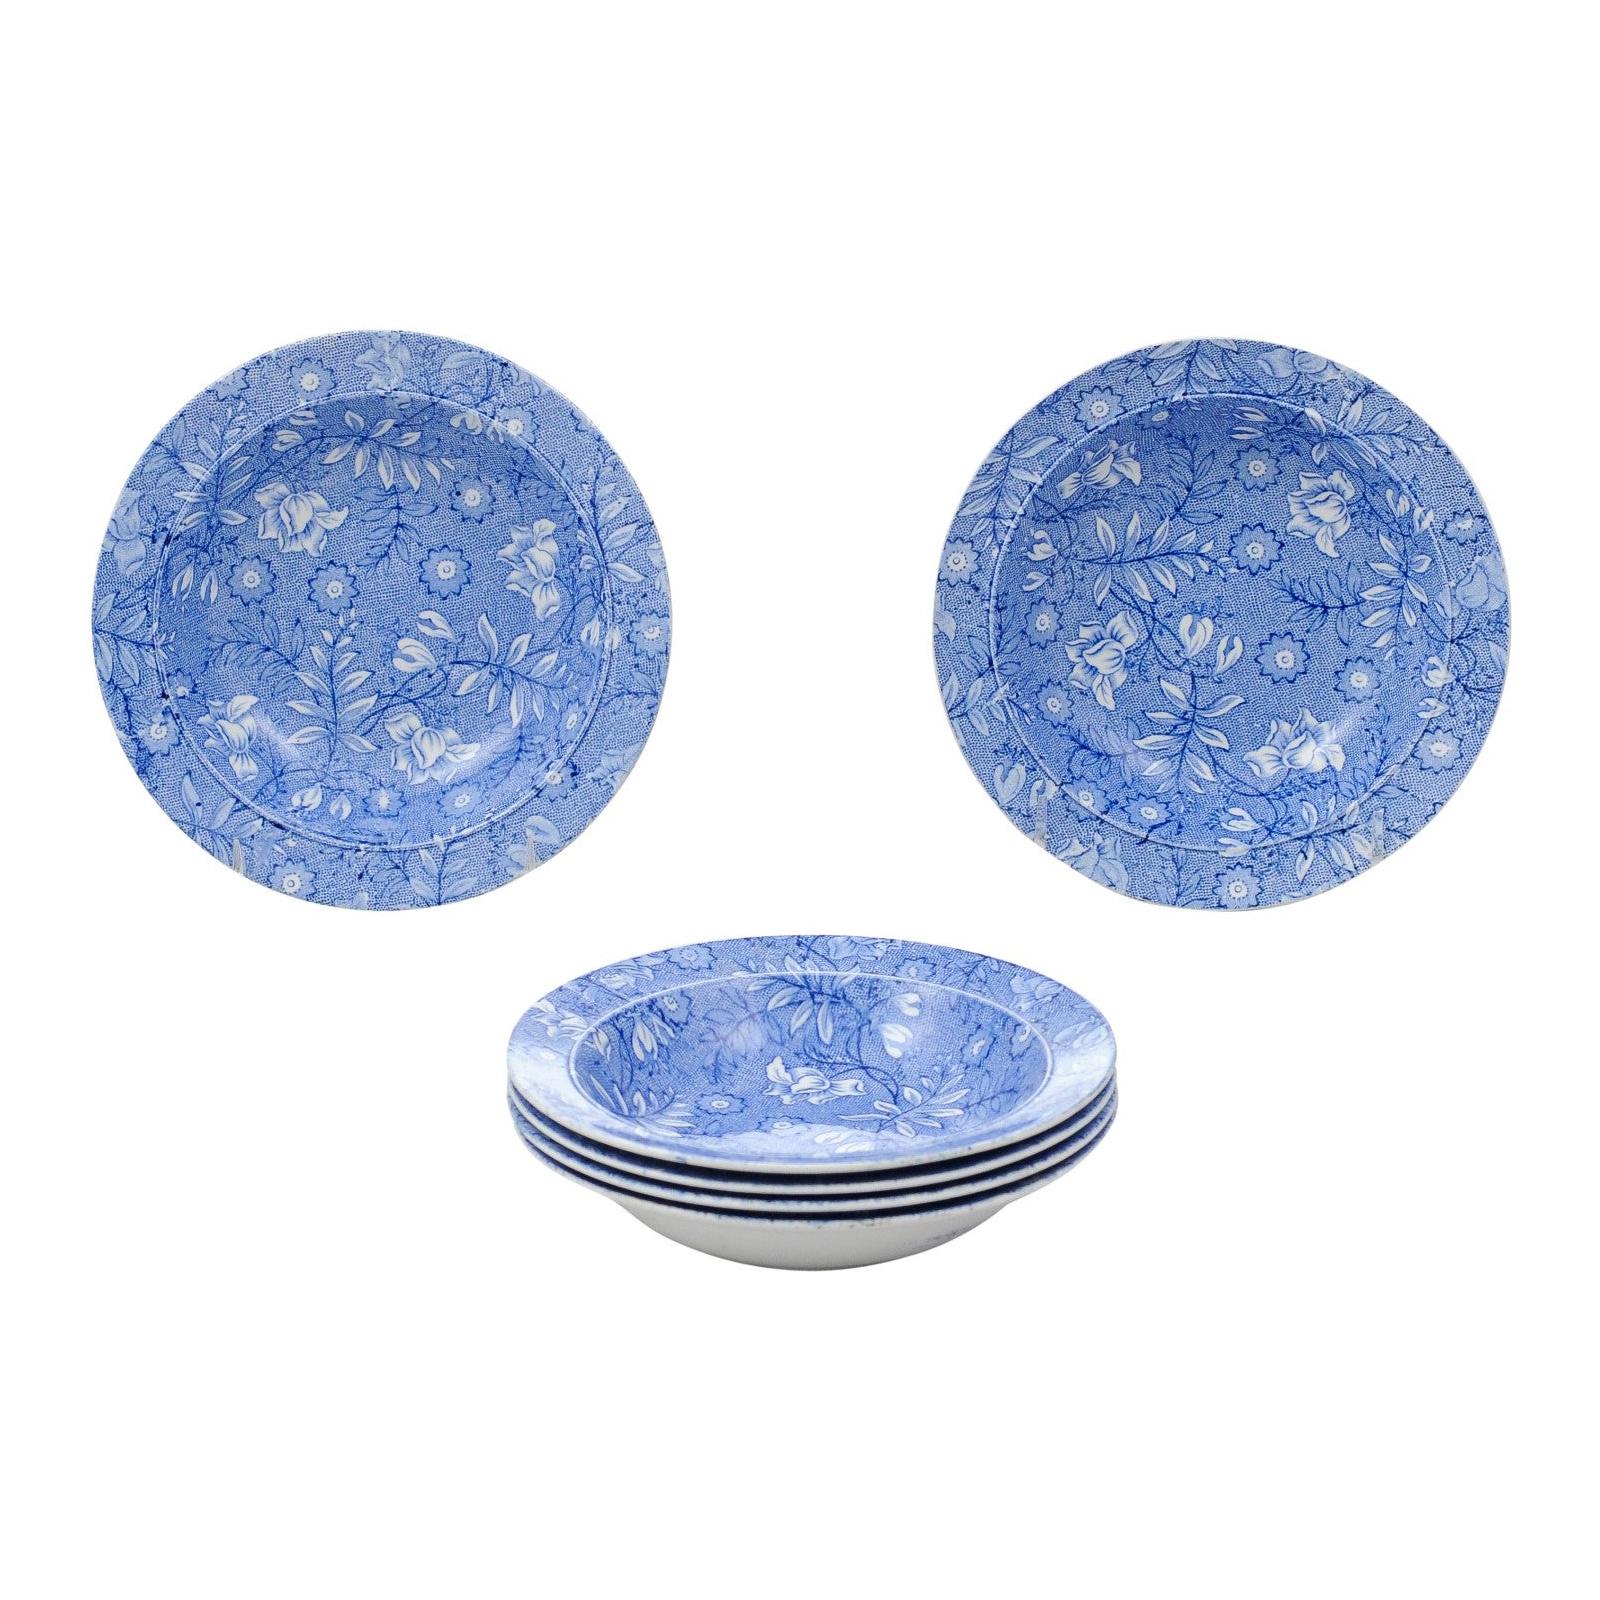 Six Royal Tudor Ware 1890s Blue and White Porcelain Bowls with Floral Pattern